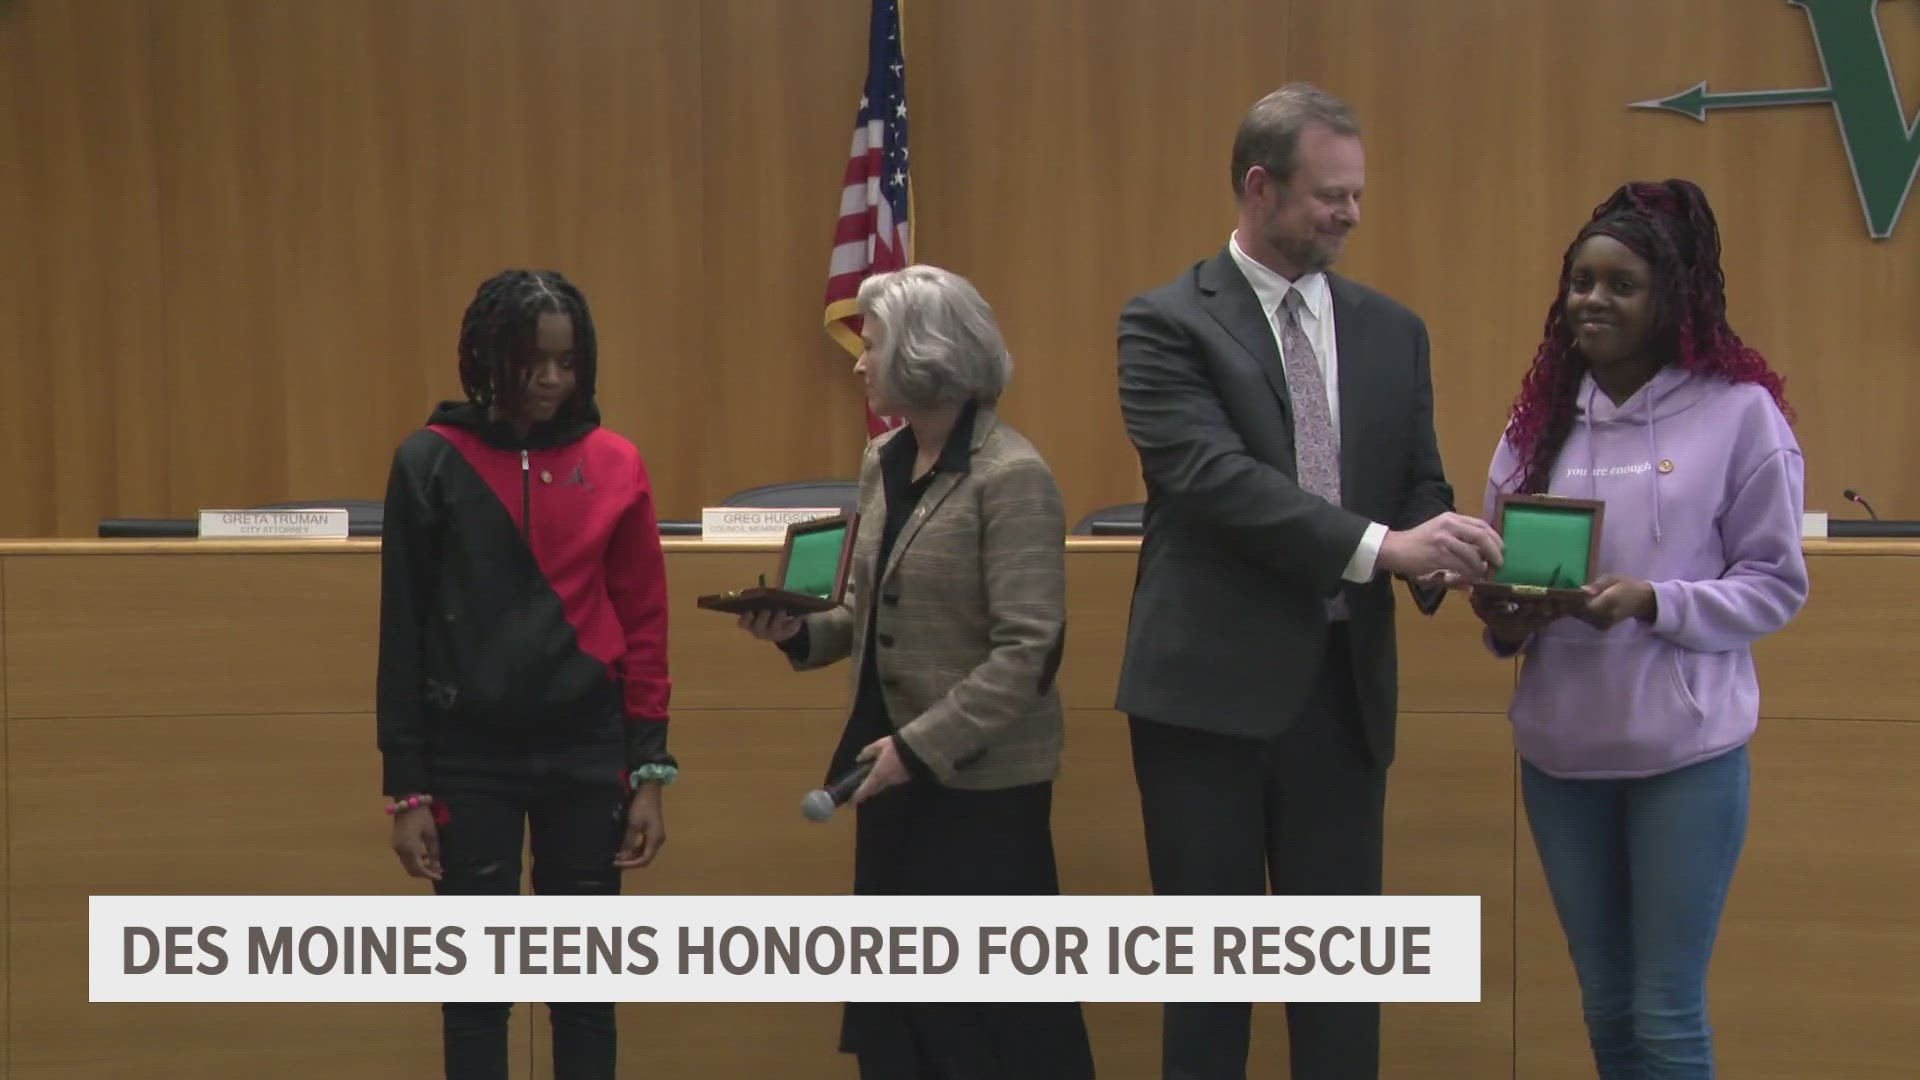 Last February, 15-year-old Jasmine Morris and her 17-year-old sister Jacora Morris entered a near-freezing pond to save two boys from drowning.